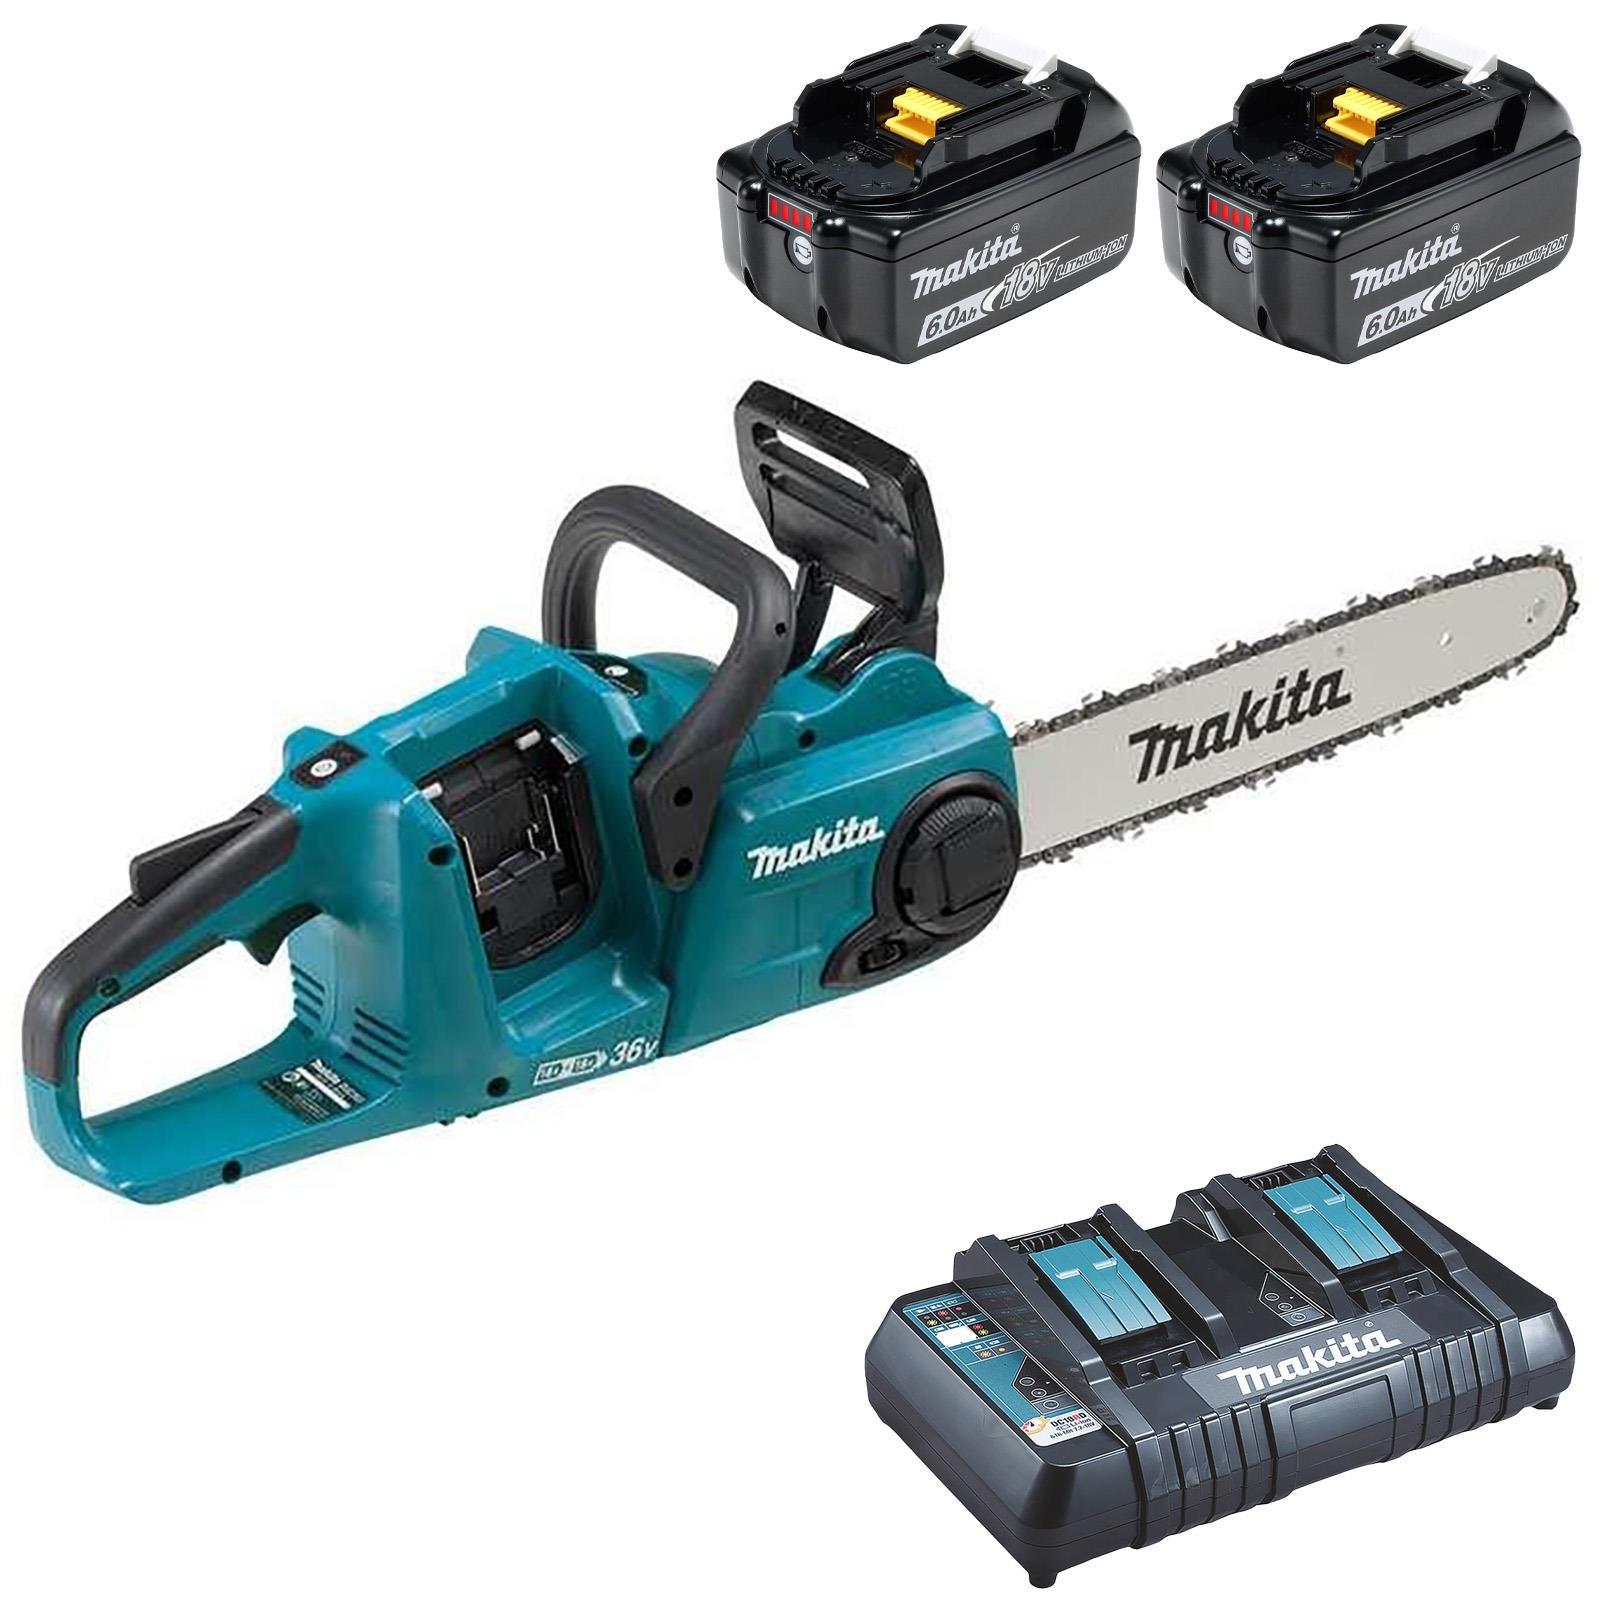 Makita Chainsaw Kit Heavy Duty 35cm 14" 18V x 2 LXT Brushless Cordless 2 x 6Ah Battery and Dual Rapid Charger Garden Tree Cutting Pruning DUC353PG2